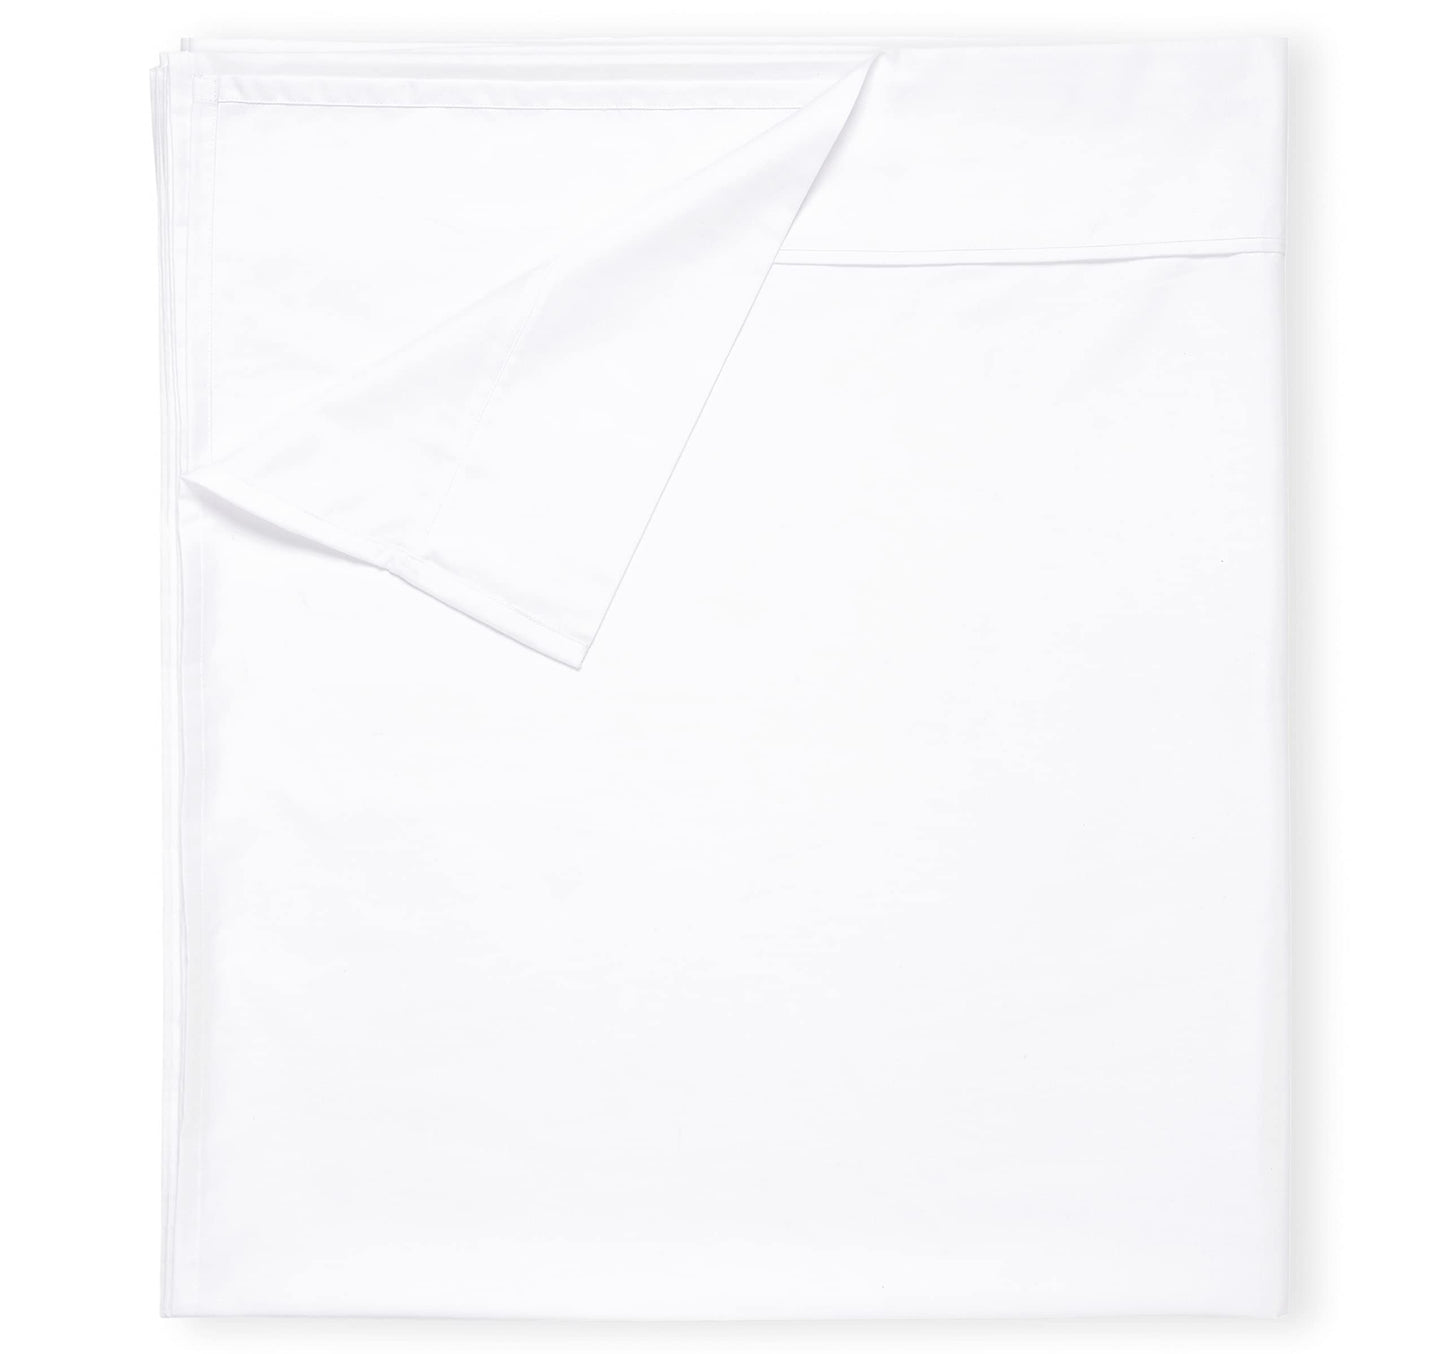 California Design Den Cal King Size Flat Sheet, Soft 400 Thread Count 100% Cotton Sheet, Sateen,Cooling & Breathable Bed Sheets, White Flat Sheet, Single California King Flat Sheet Only (Bright White)